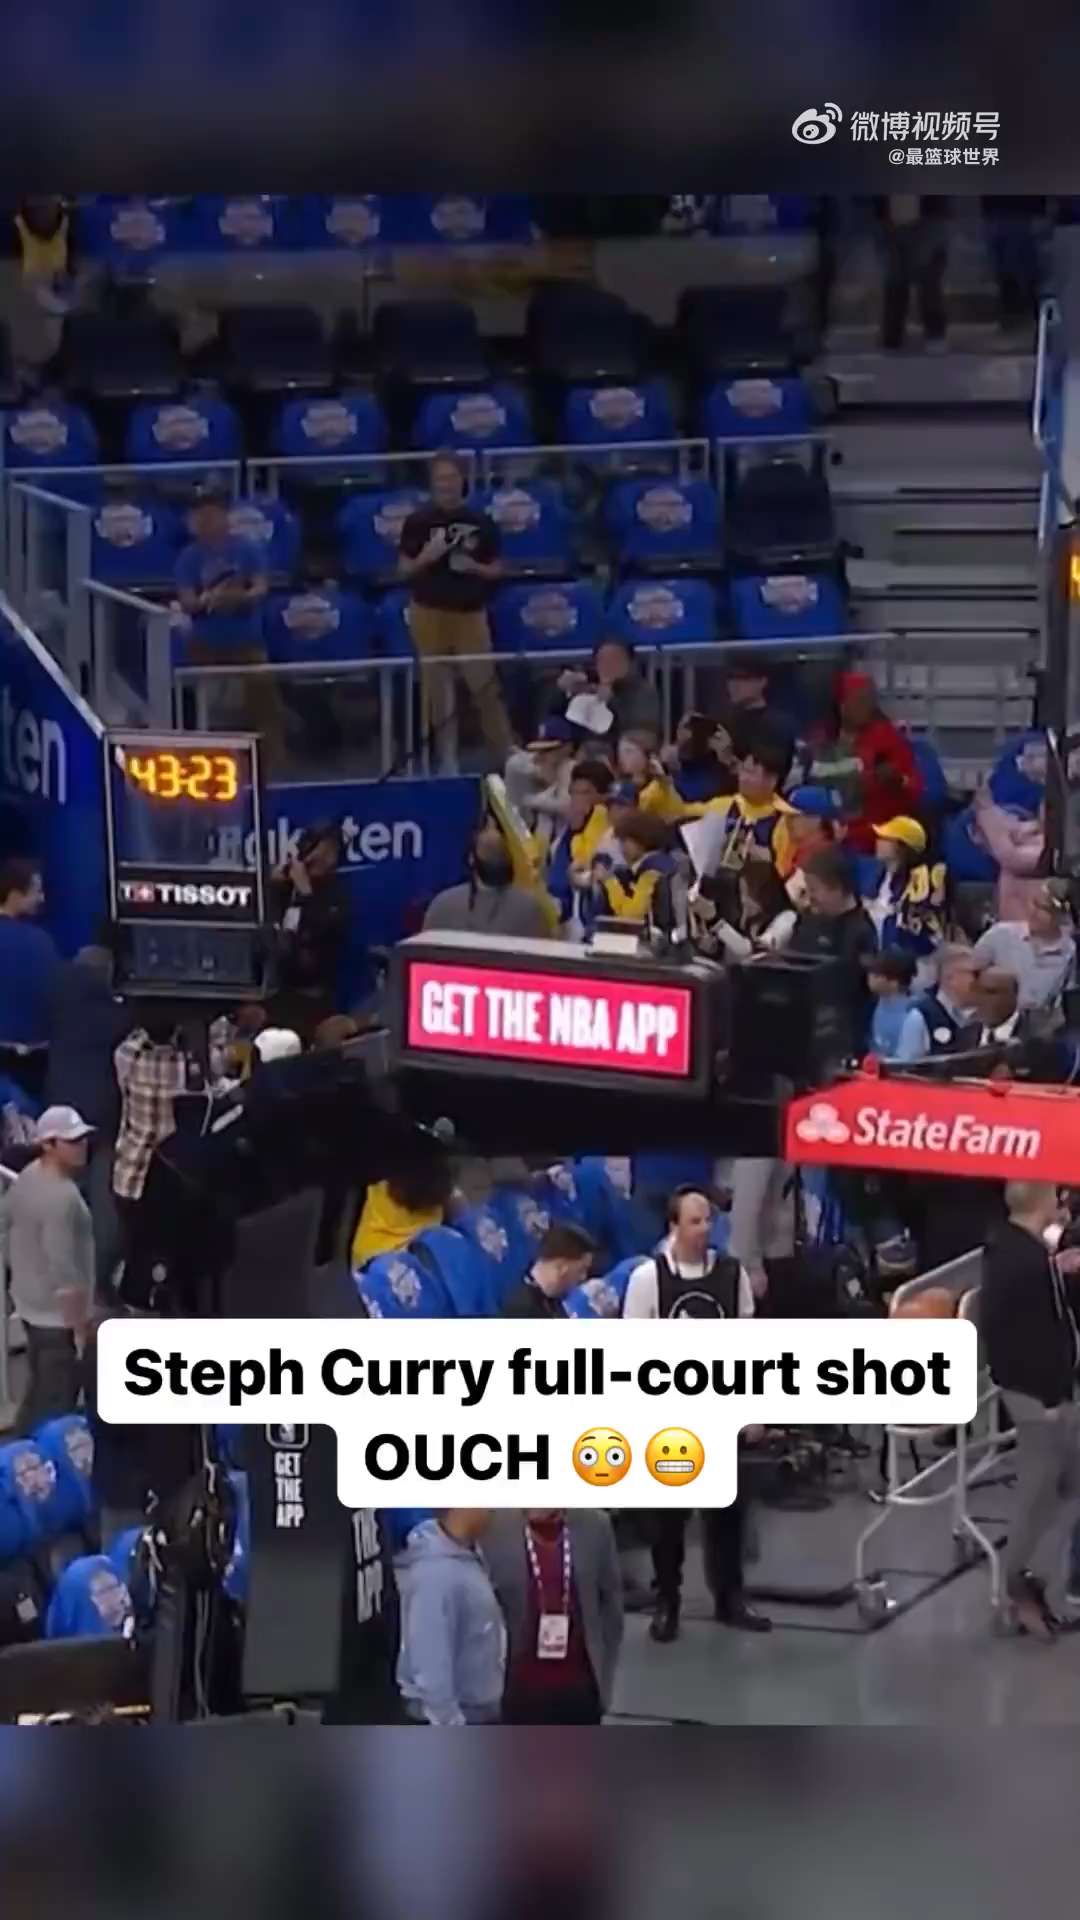 steph curry full court shot ouch short MP4 video